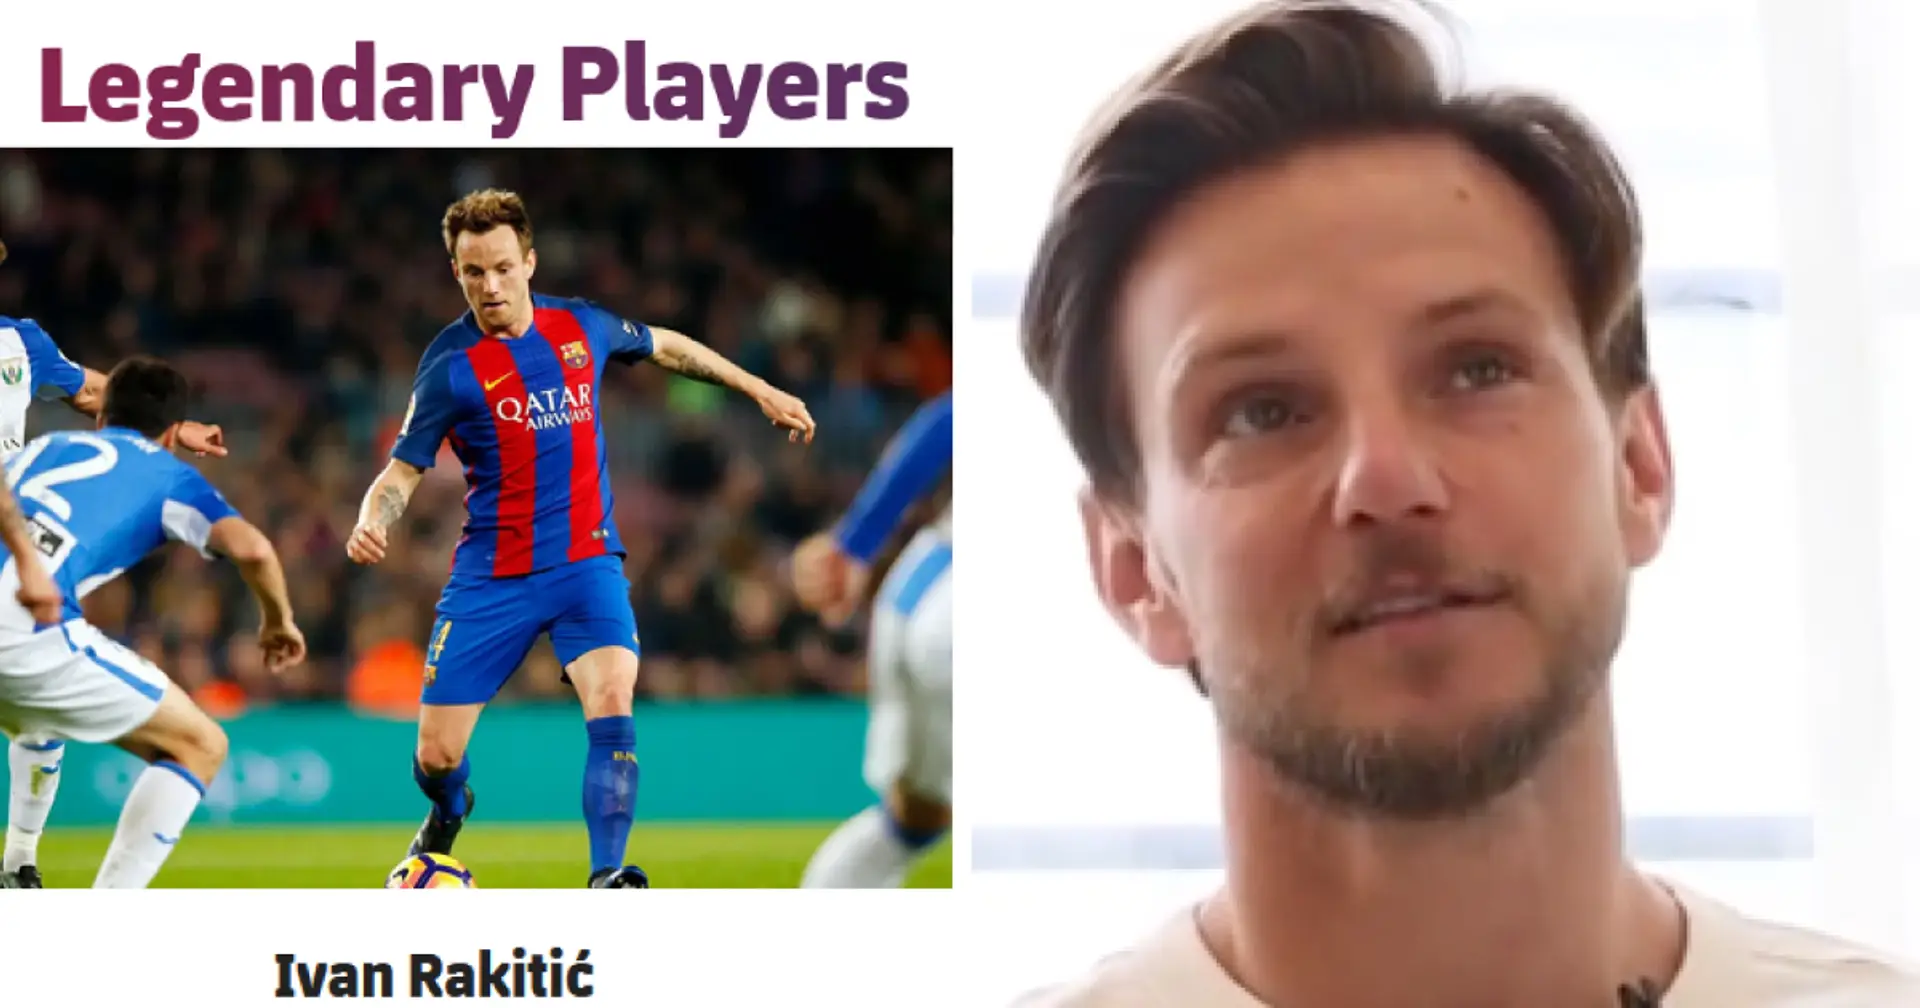 Rakitic reacts to being officially listed among Barca legends